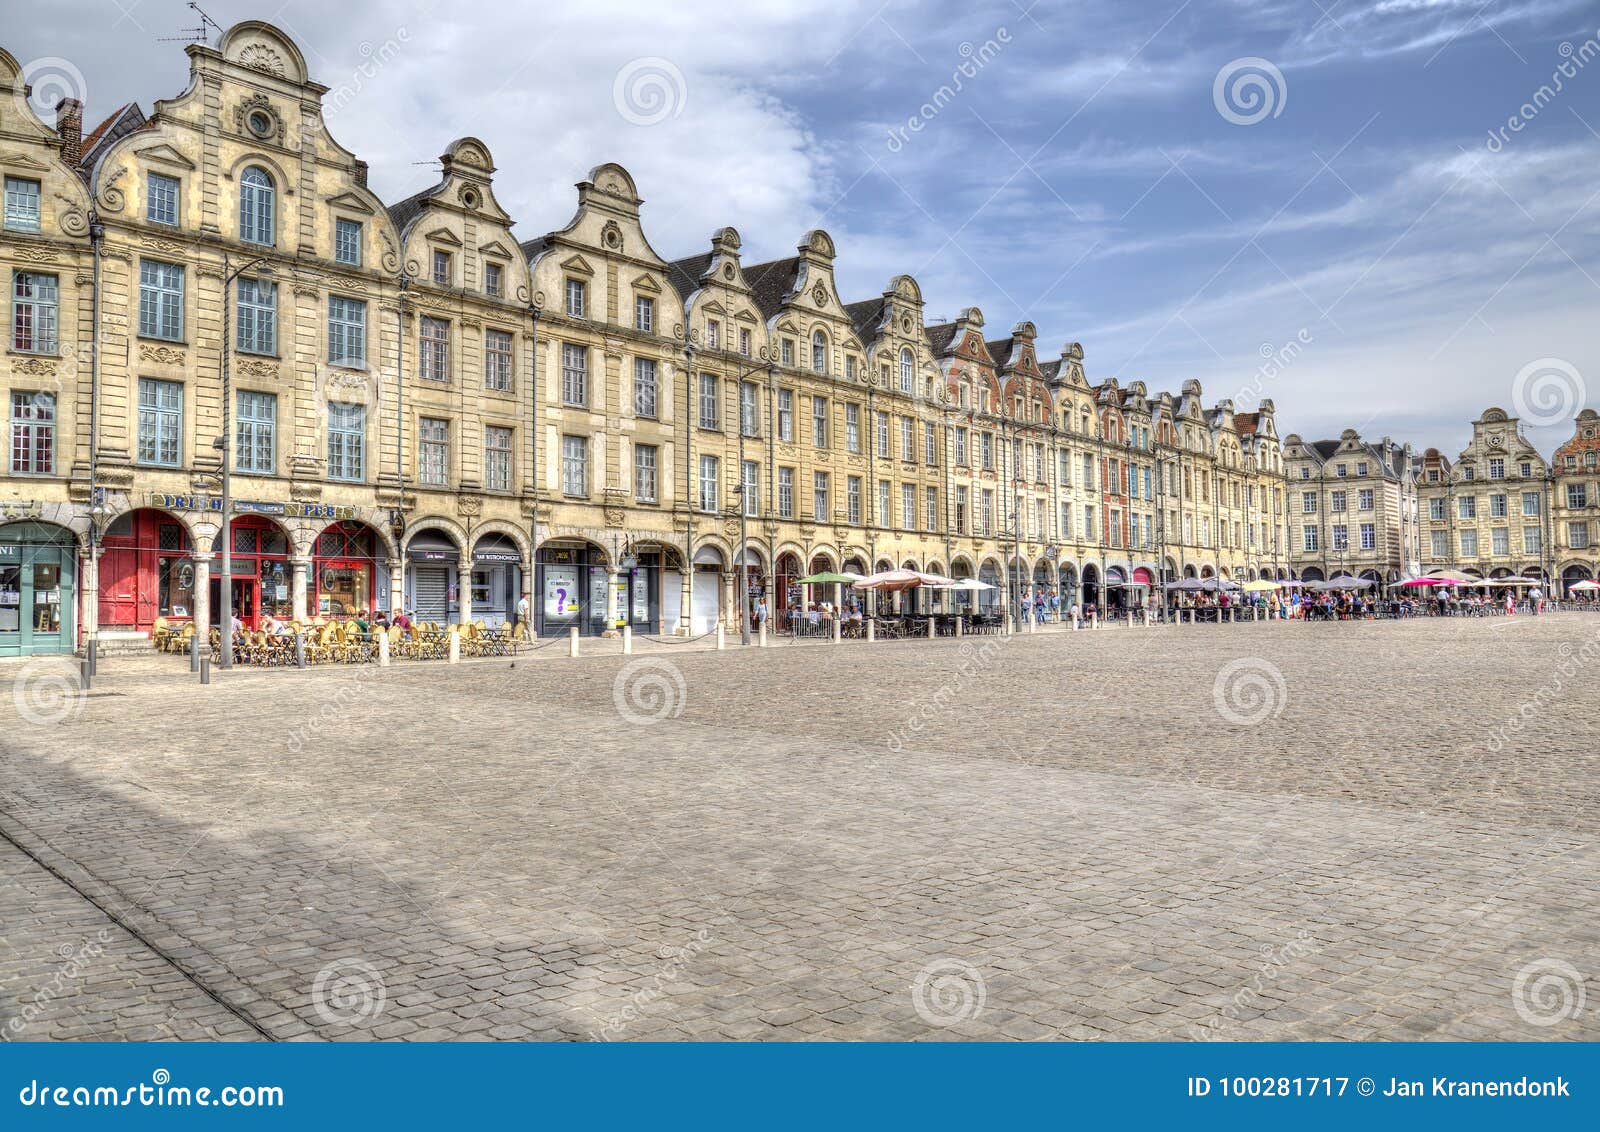 Arras marketplace in France. Arras, France - May 28, 2017: People sit at restaurants on the market place or town square in Arras in France on May 28, 2017